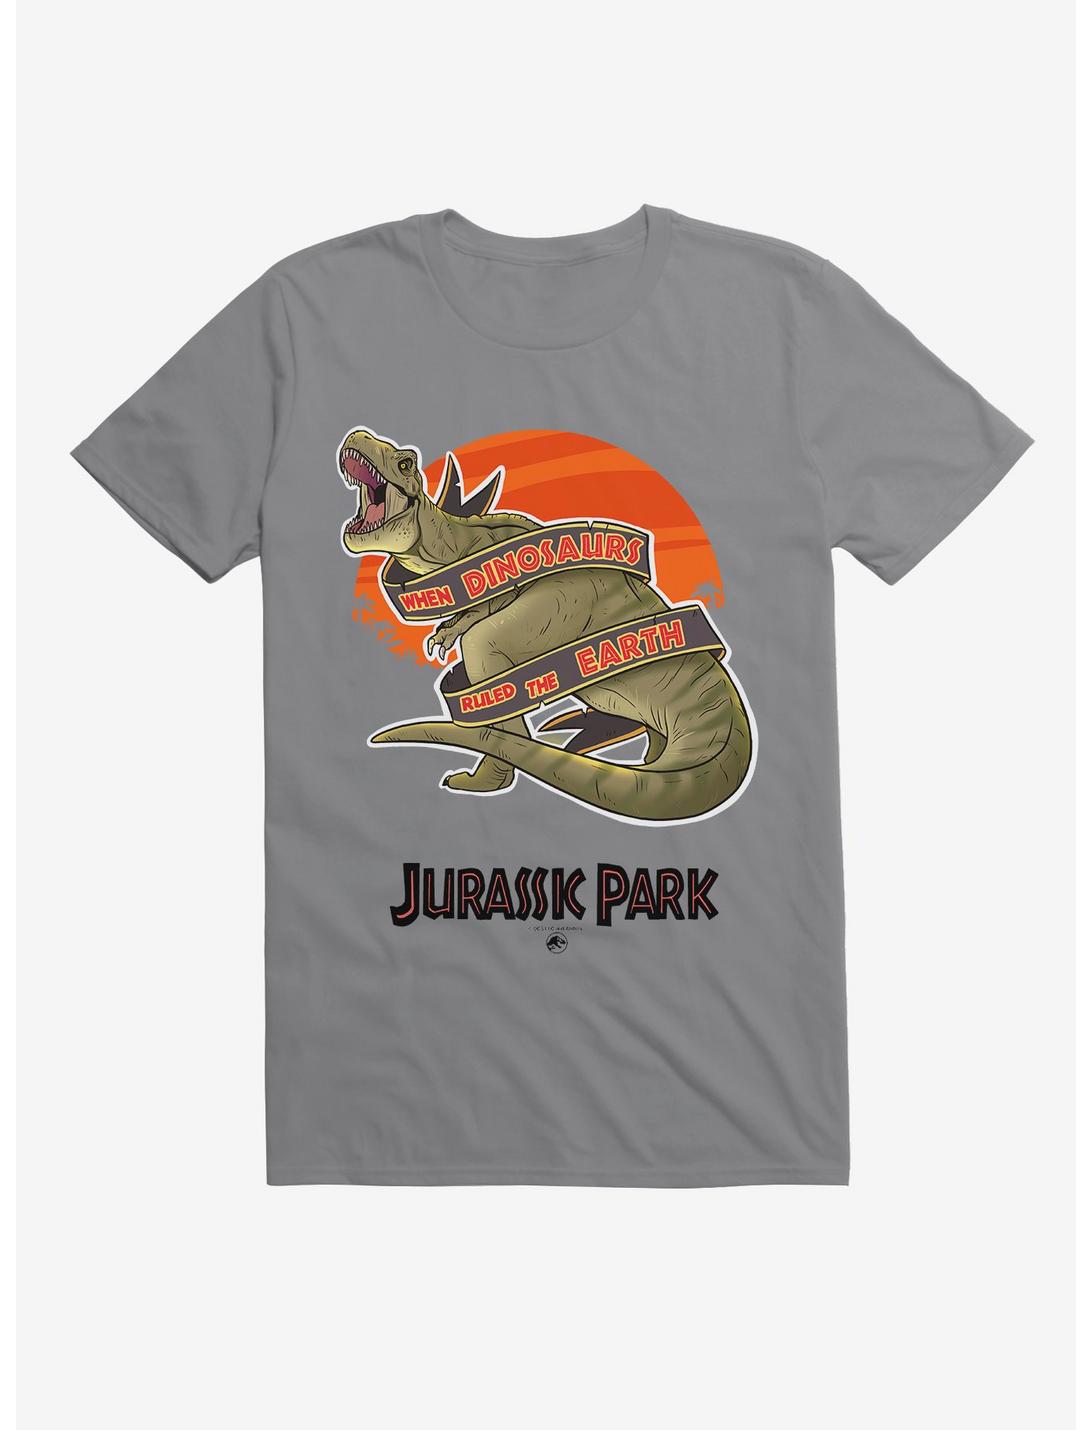 Jurassic Park When Dinos Rules The Earth Black T-Shirt, , hi-res